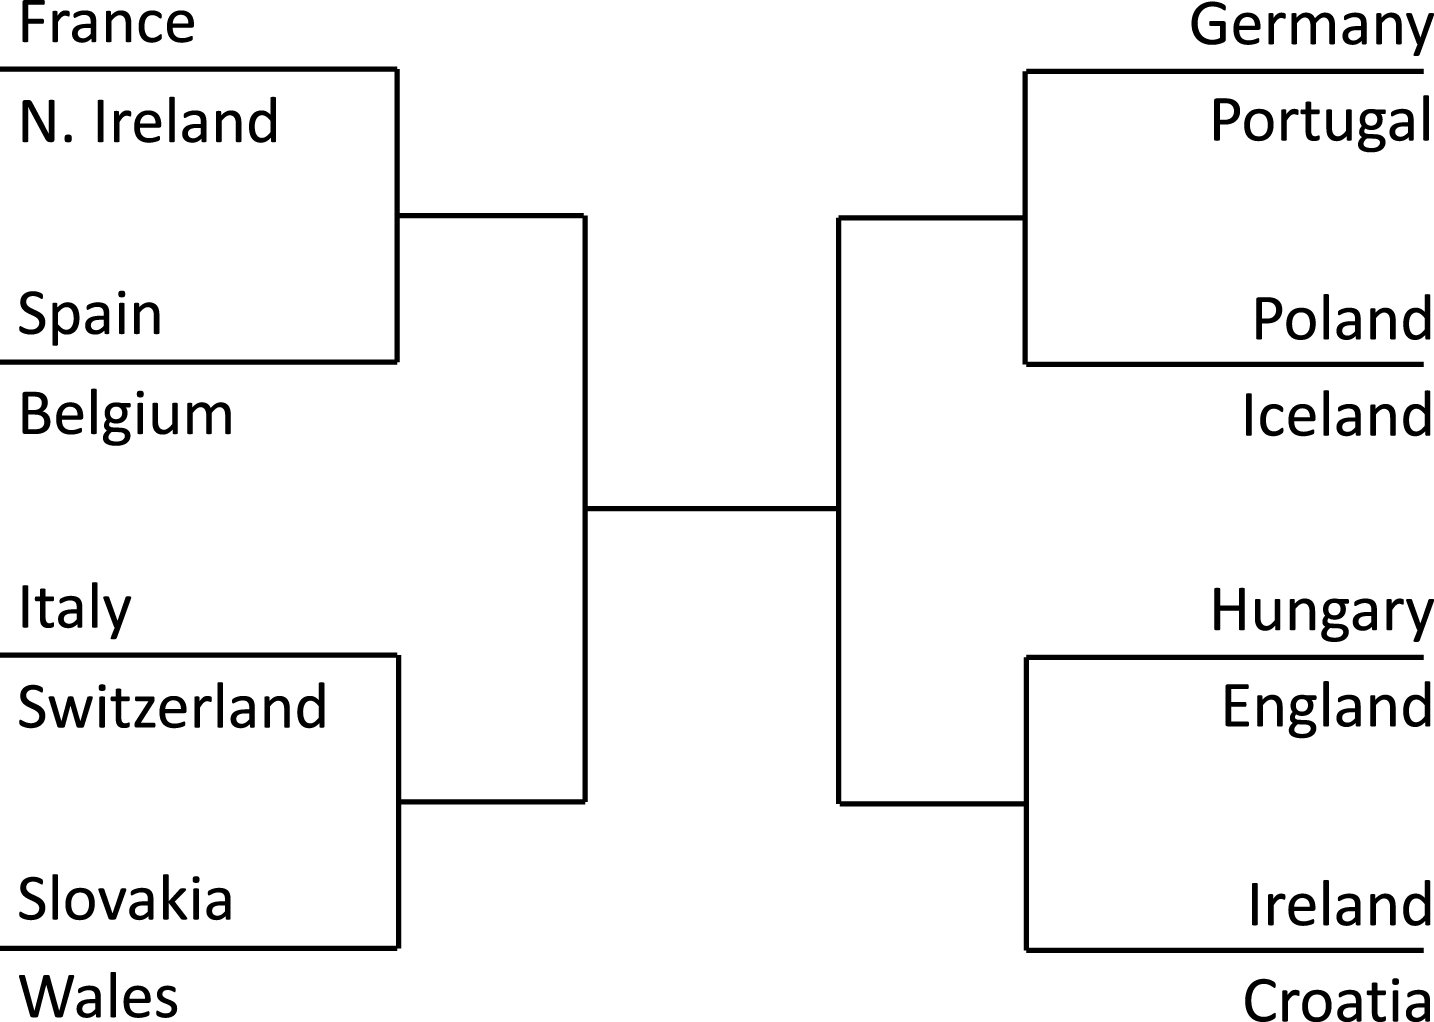 Ideal bracket if we use the Euro 2016 rankings reported in Table 9. It does not satisfy the group diversity constraint.